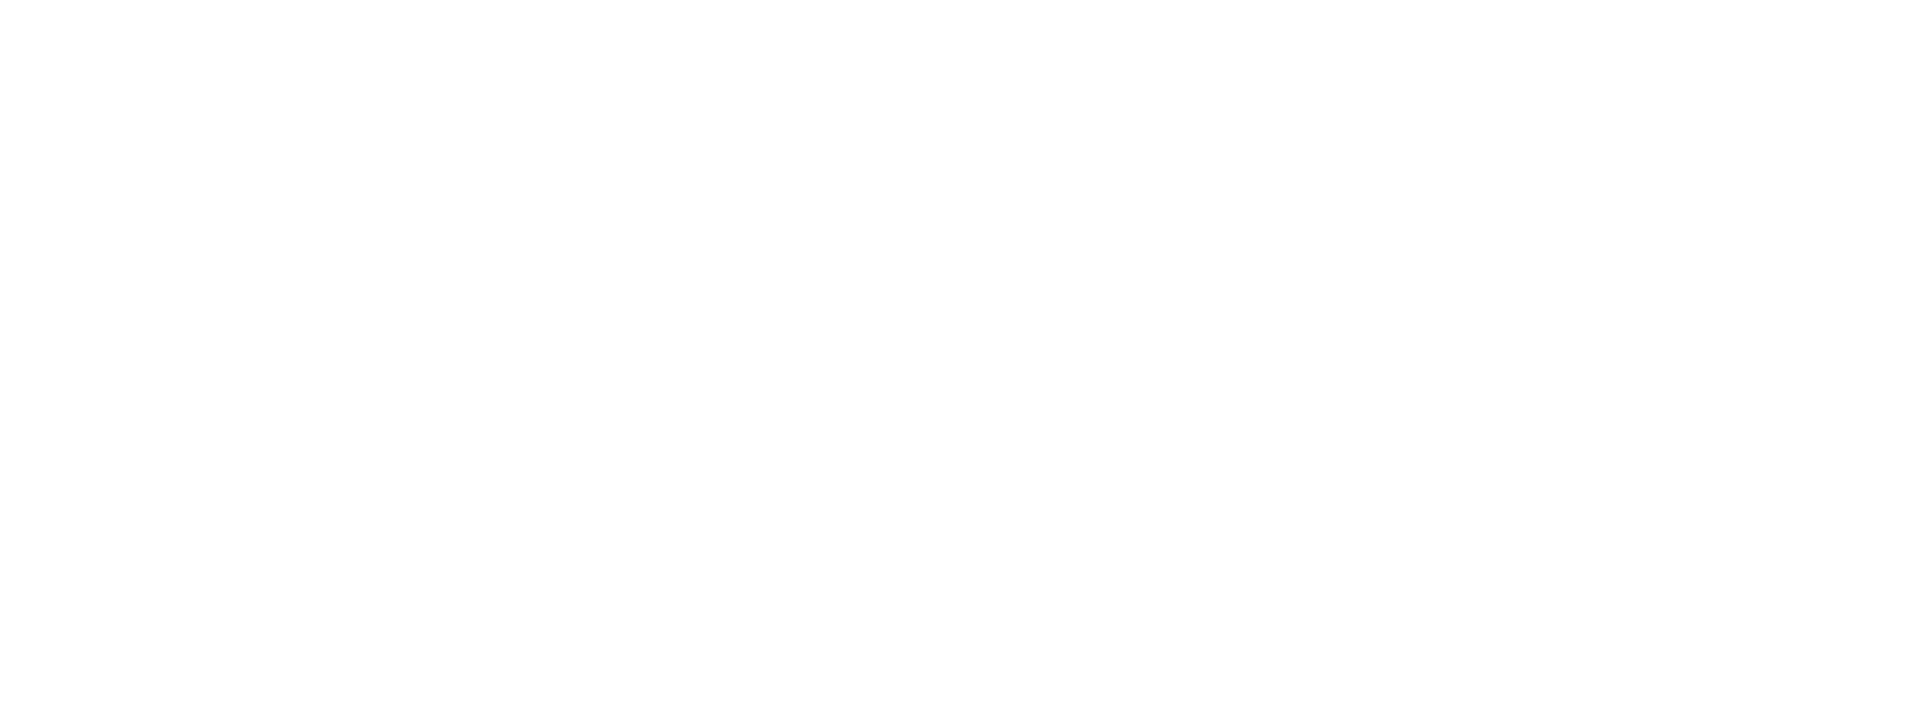 The Food Tech Summit & Expo